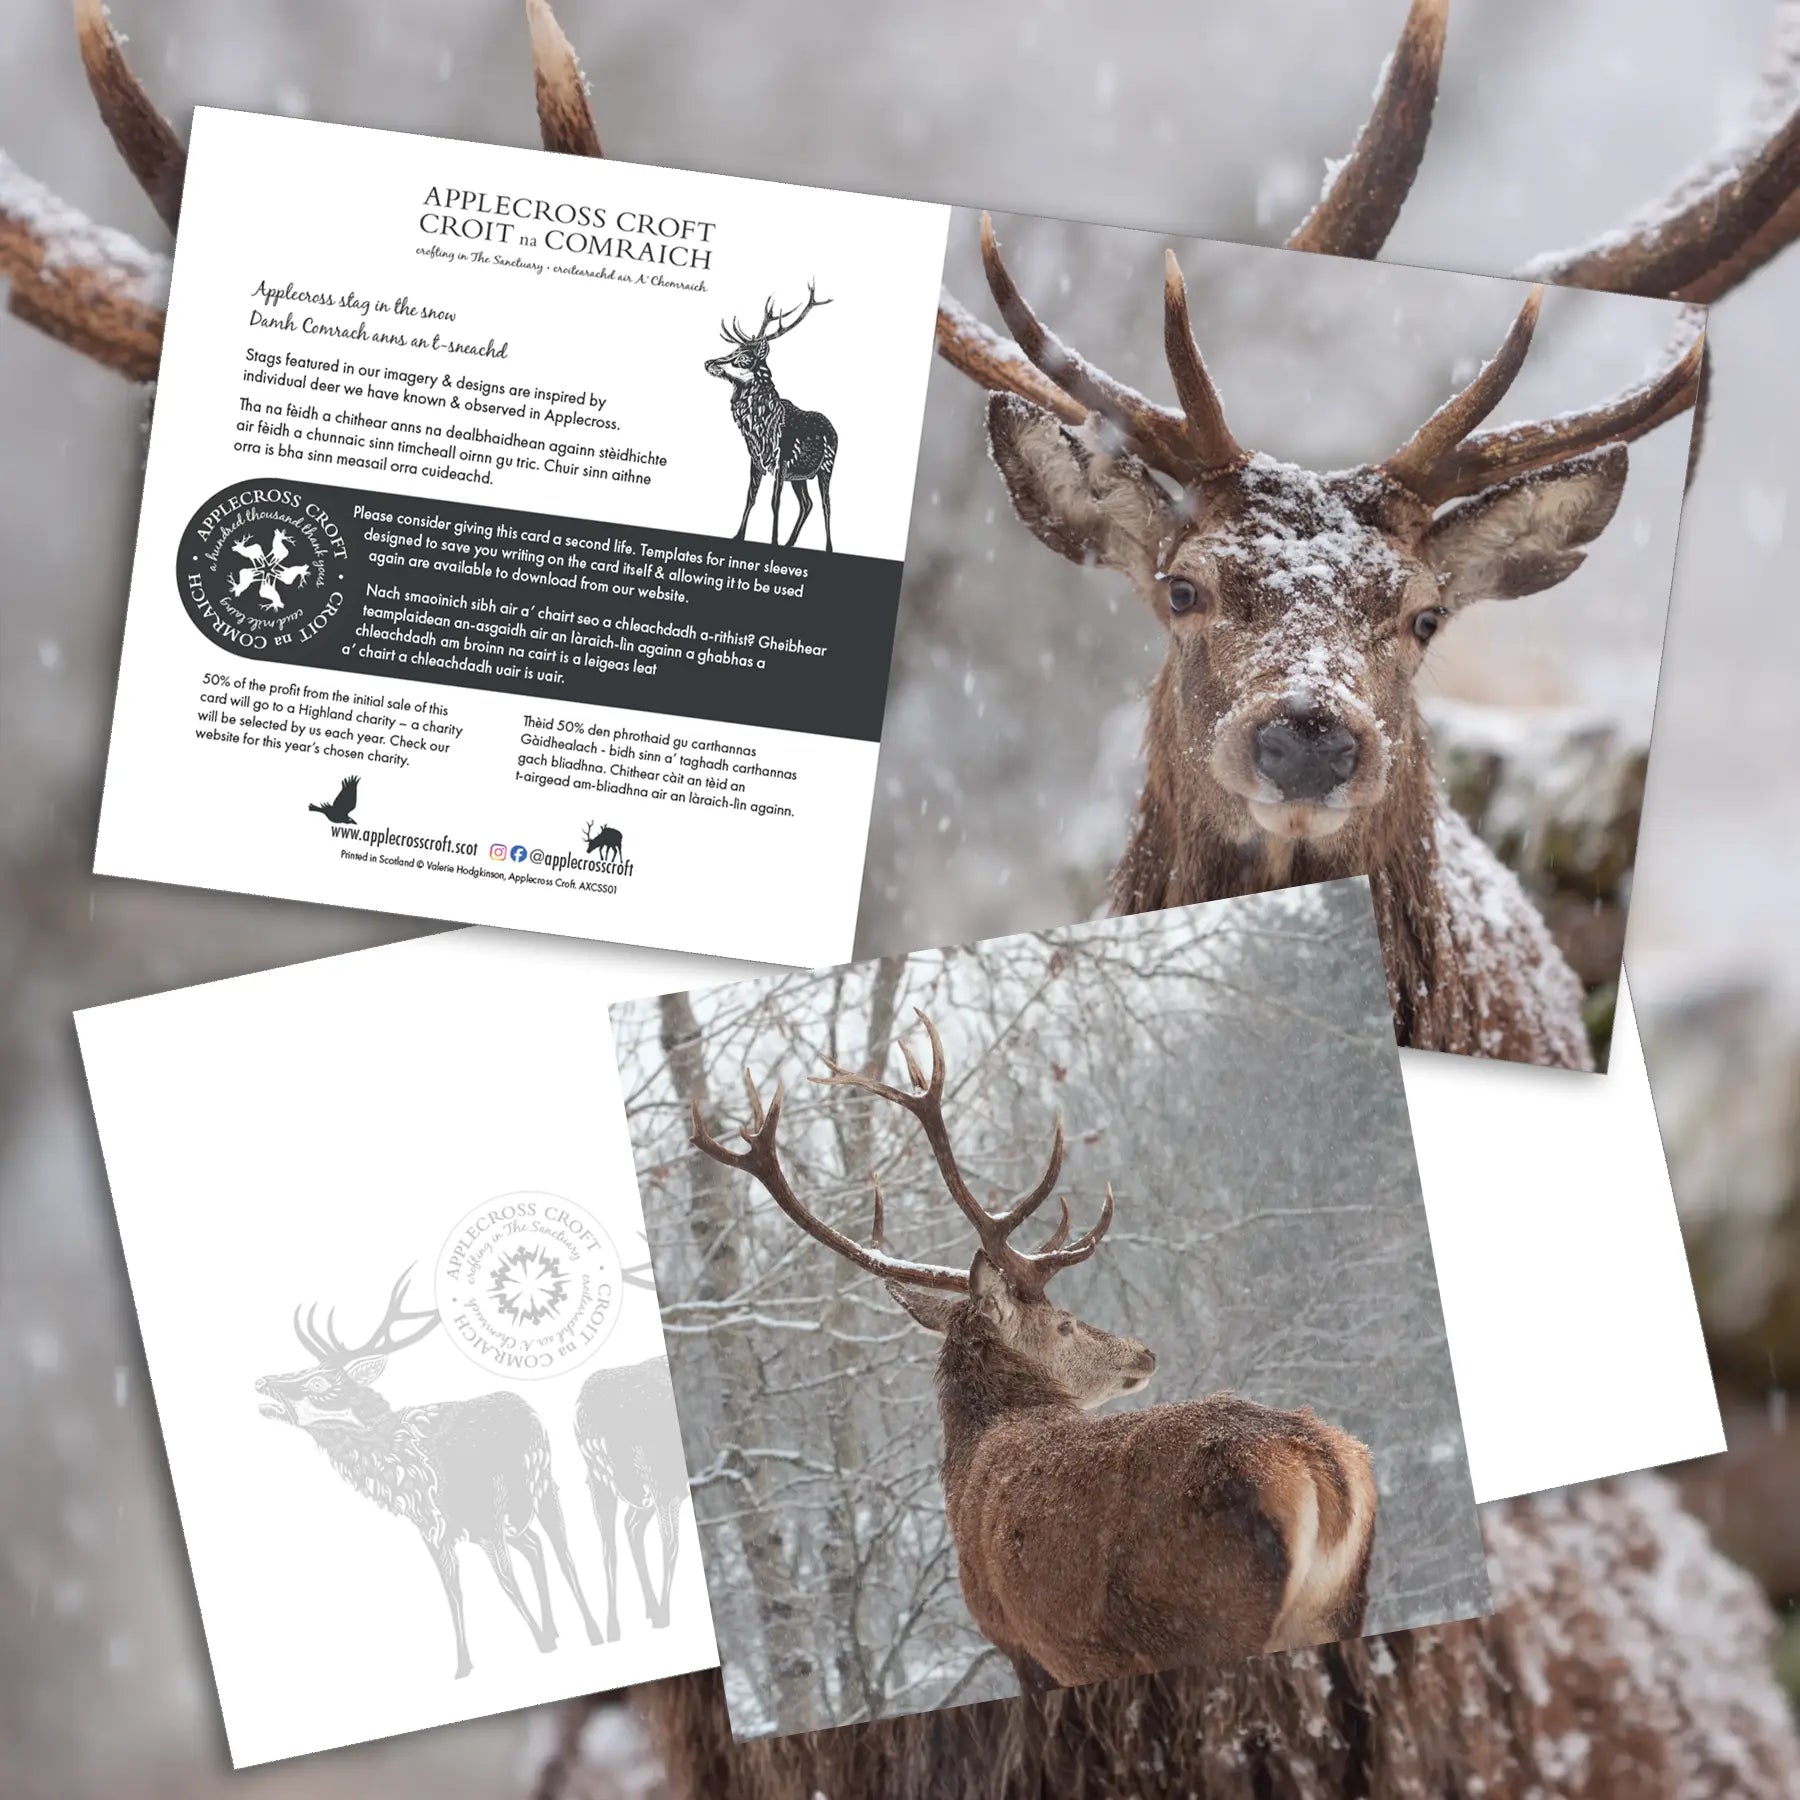 Applecross stag greetings cards – 50% profits to charity.